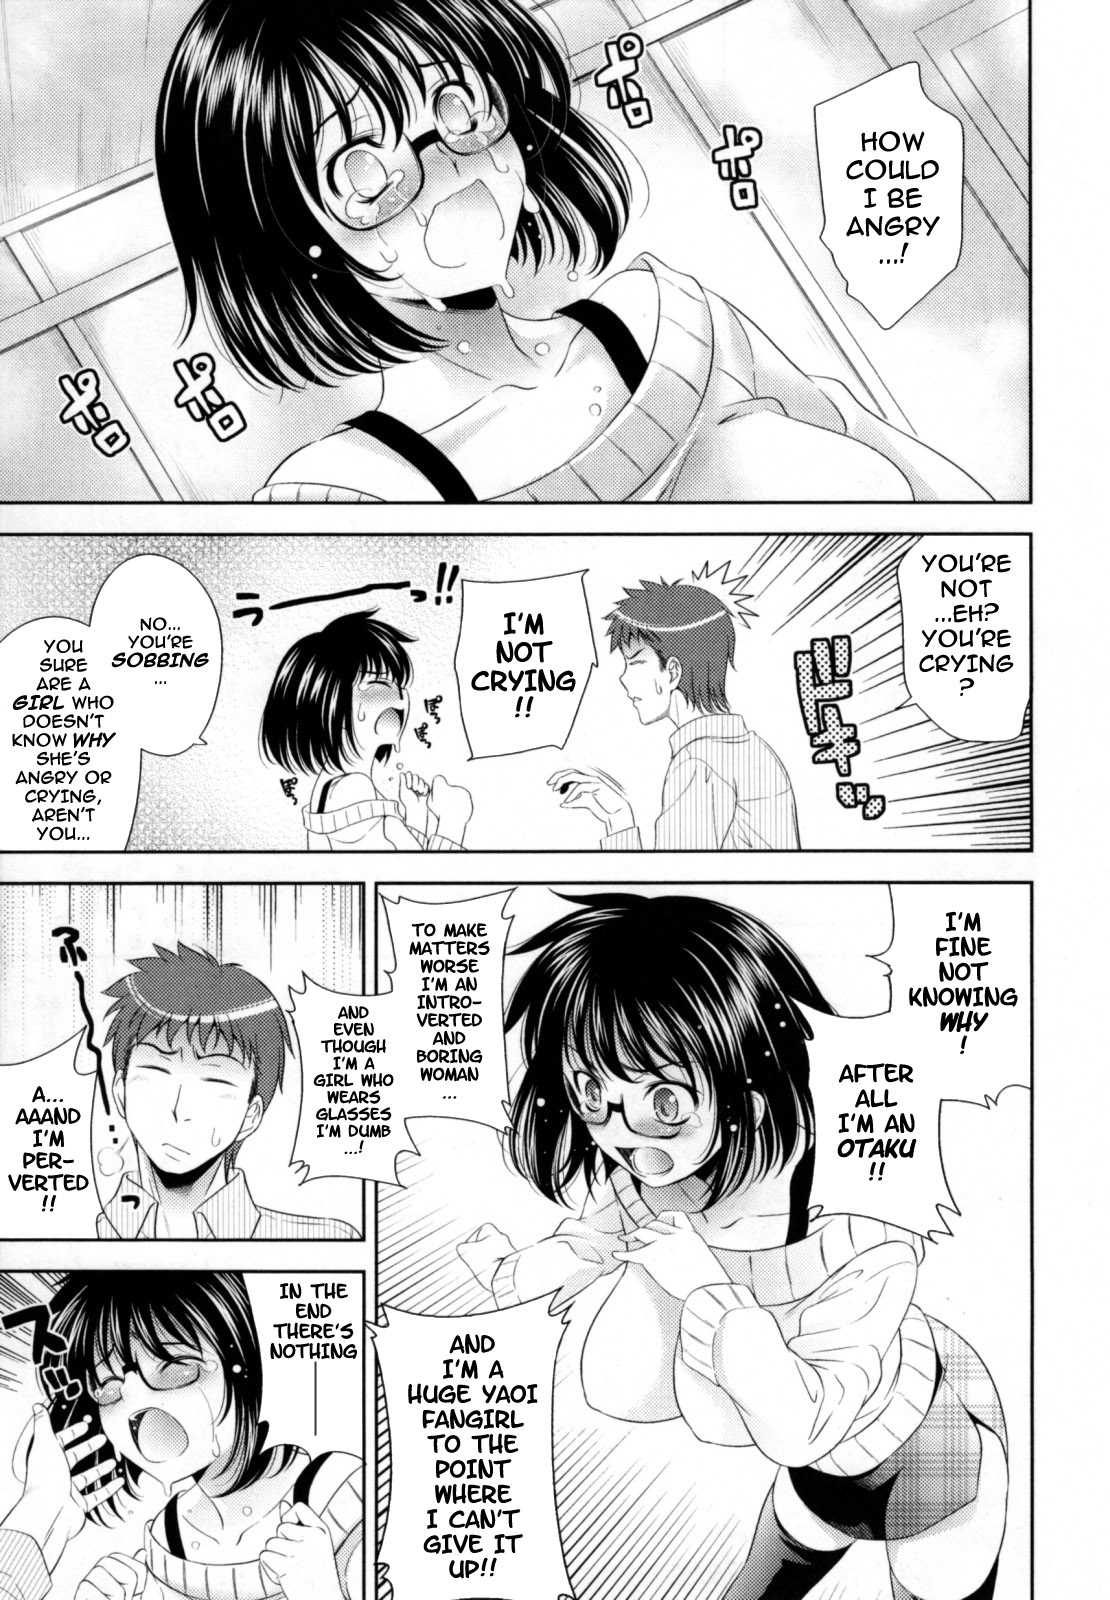 [Yasui Riosuke] BUST TO BUST [ENG] (COMPLETE) 